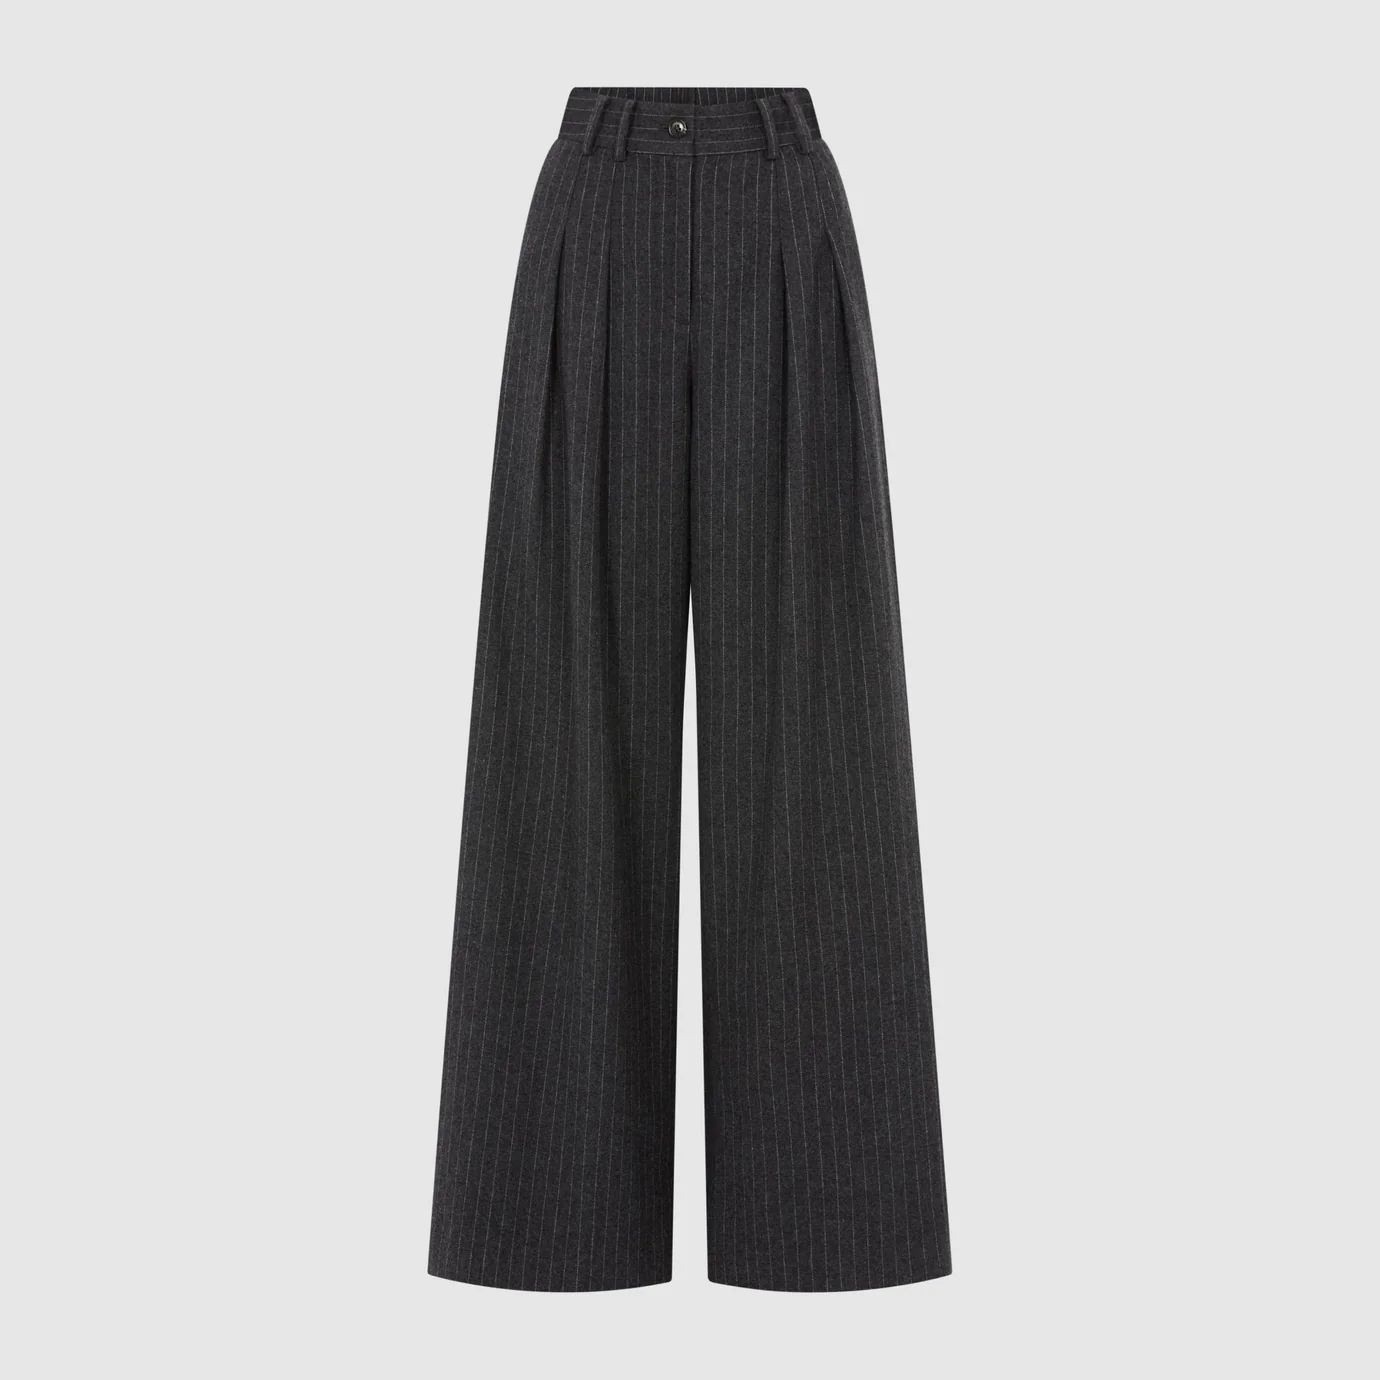 TAILORED PINSTRIPE WIDE LEG TROUSERS - CHARCOAL | WAT The Brand